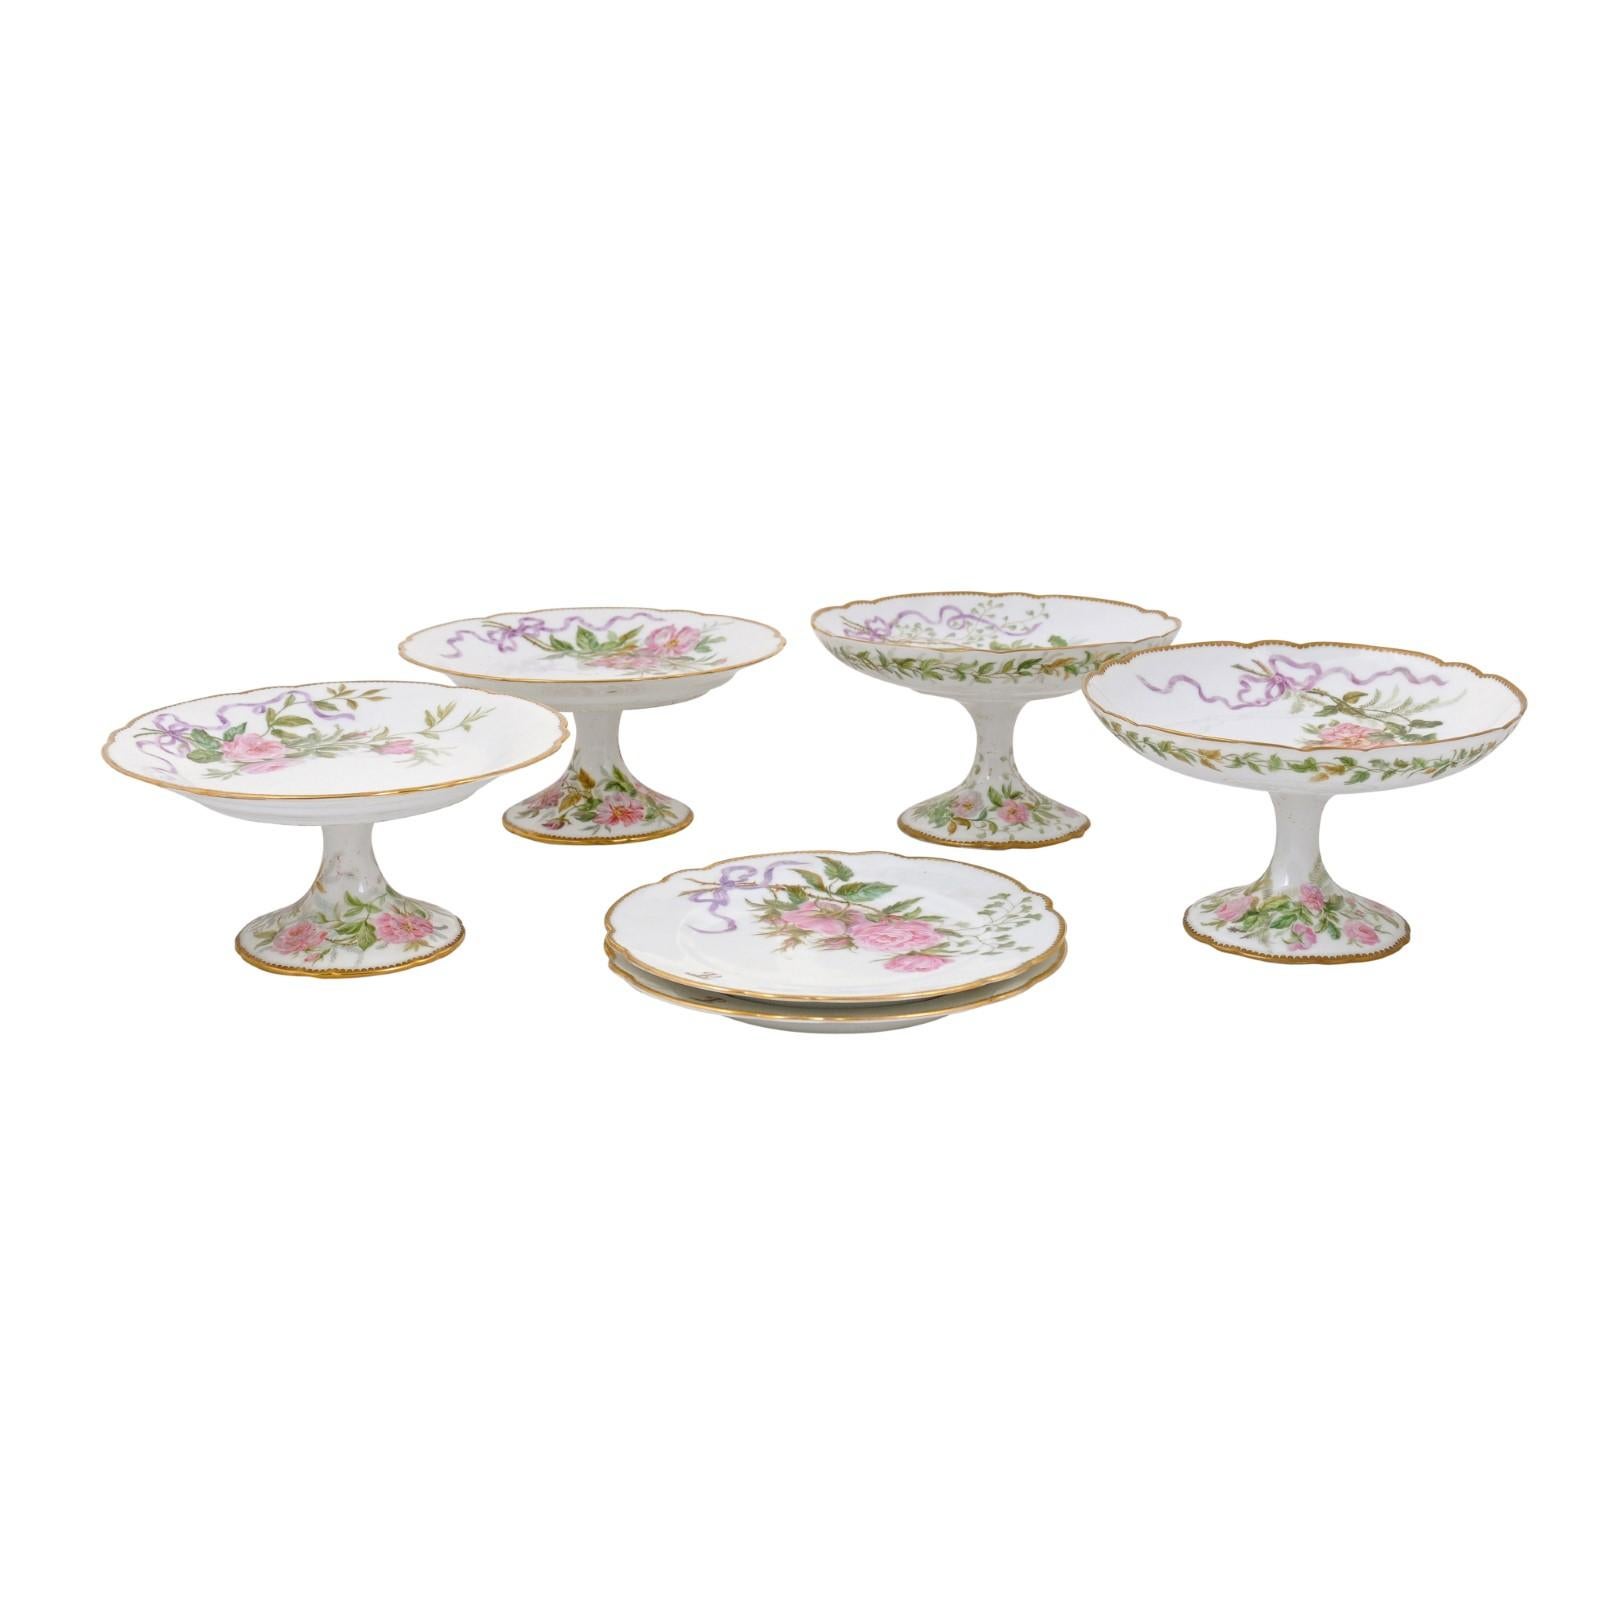 English Porcelain Compotes and Plates with Floral Décor and Gilt Trim For Sale